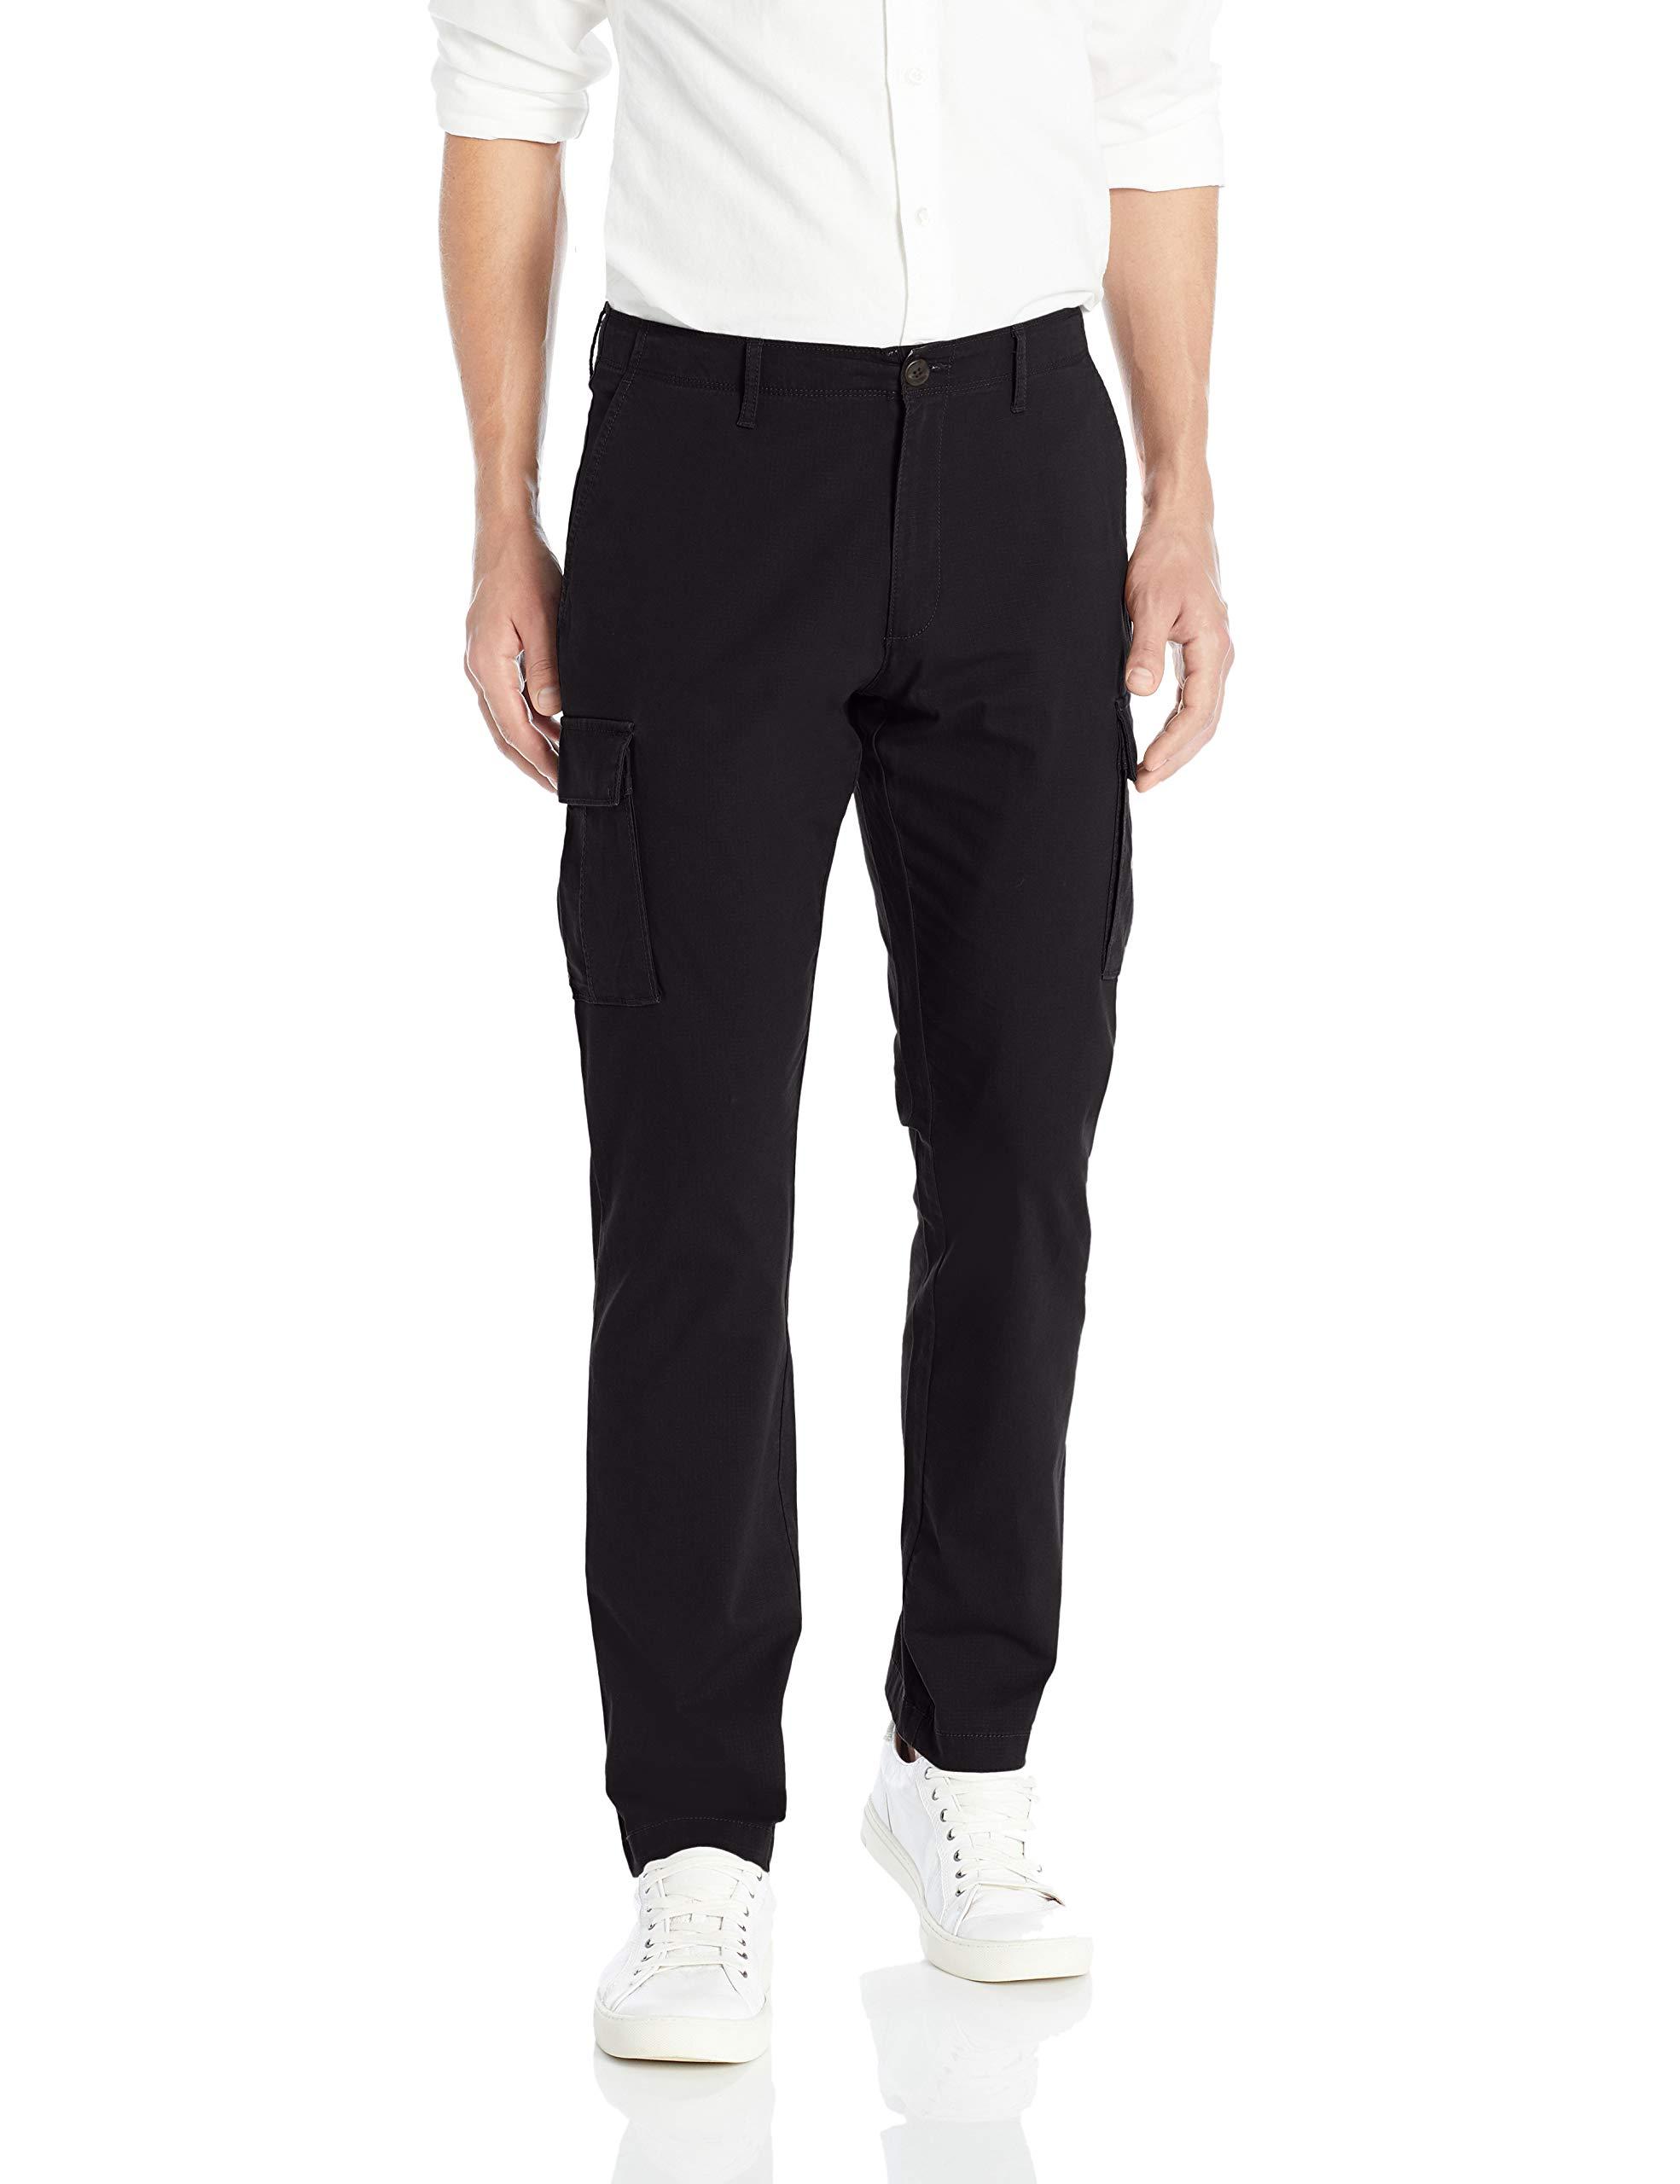 Goodthreads Synthetic Slim-fit Ripstop Cargo Pant in Black for Men - Lyst